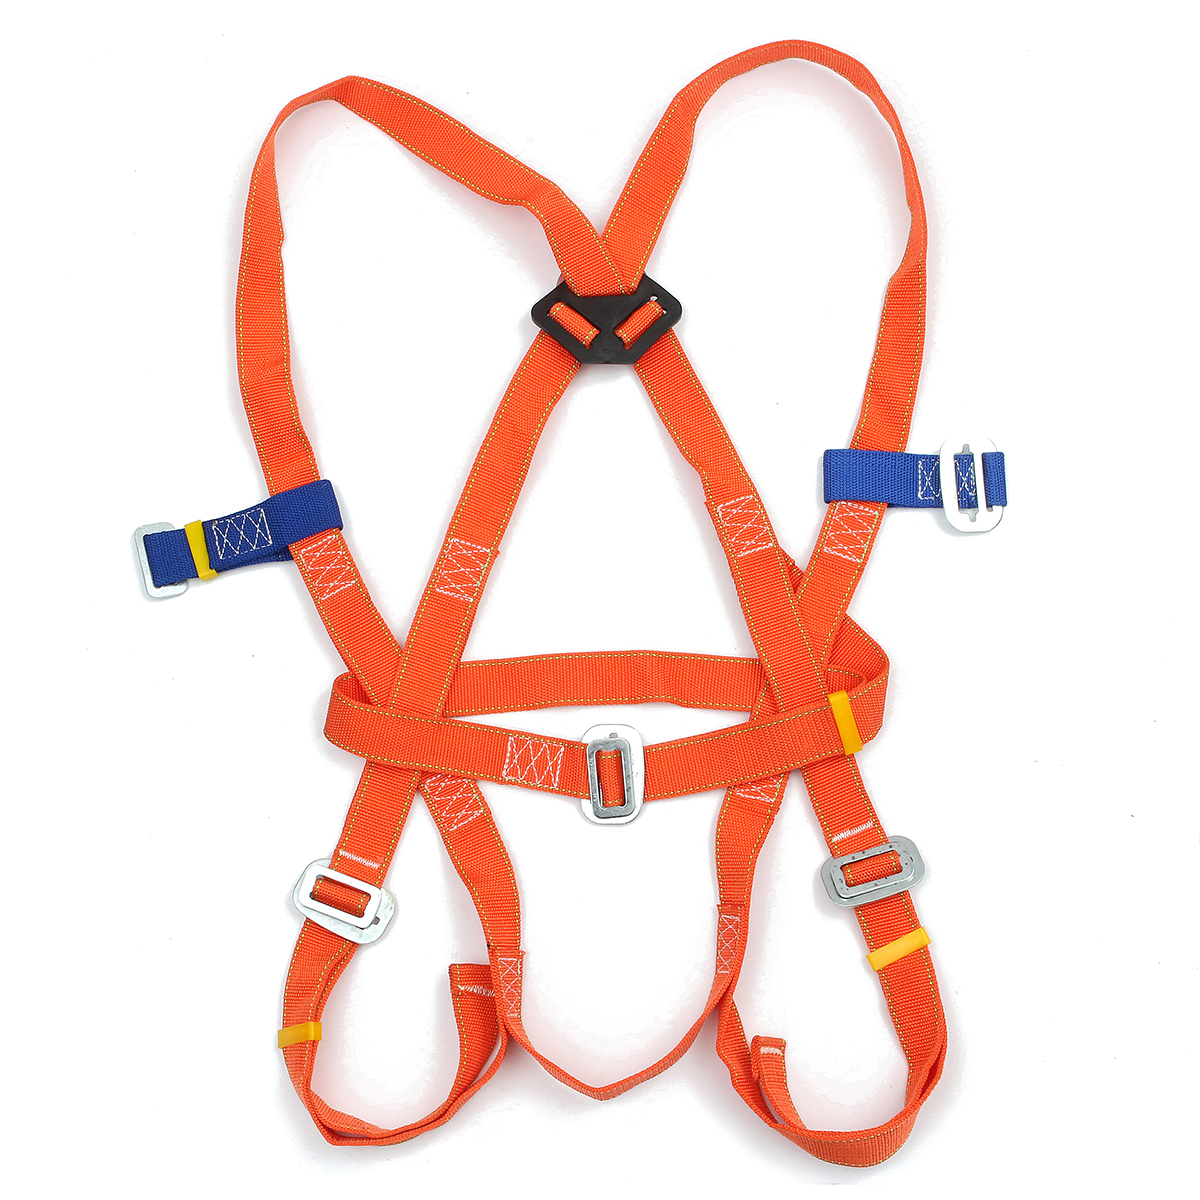 Outdoor-Full-Body-Climbing-Safety-Belt-Rescue-Rappelling-Aloft-Work-Suspension-Strap-Harness-1132532-1